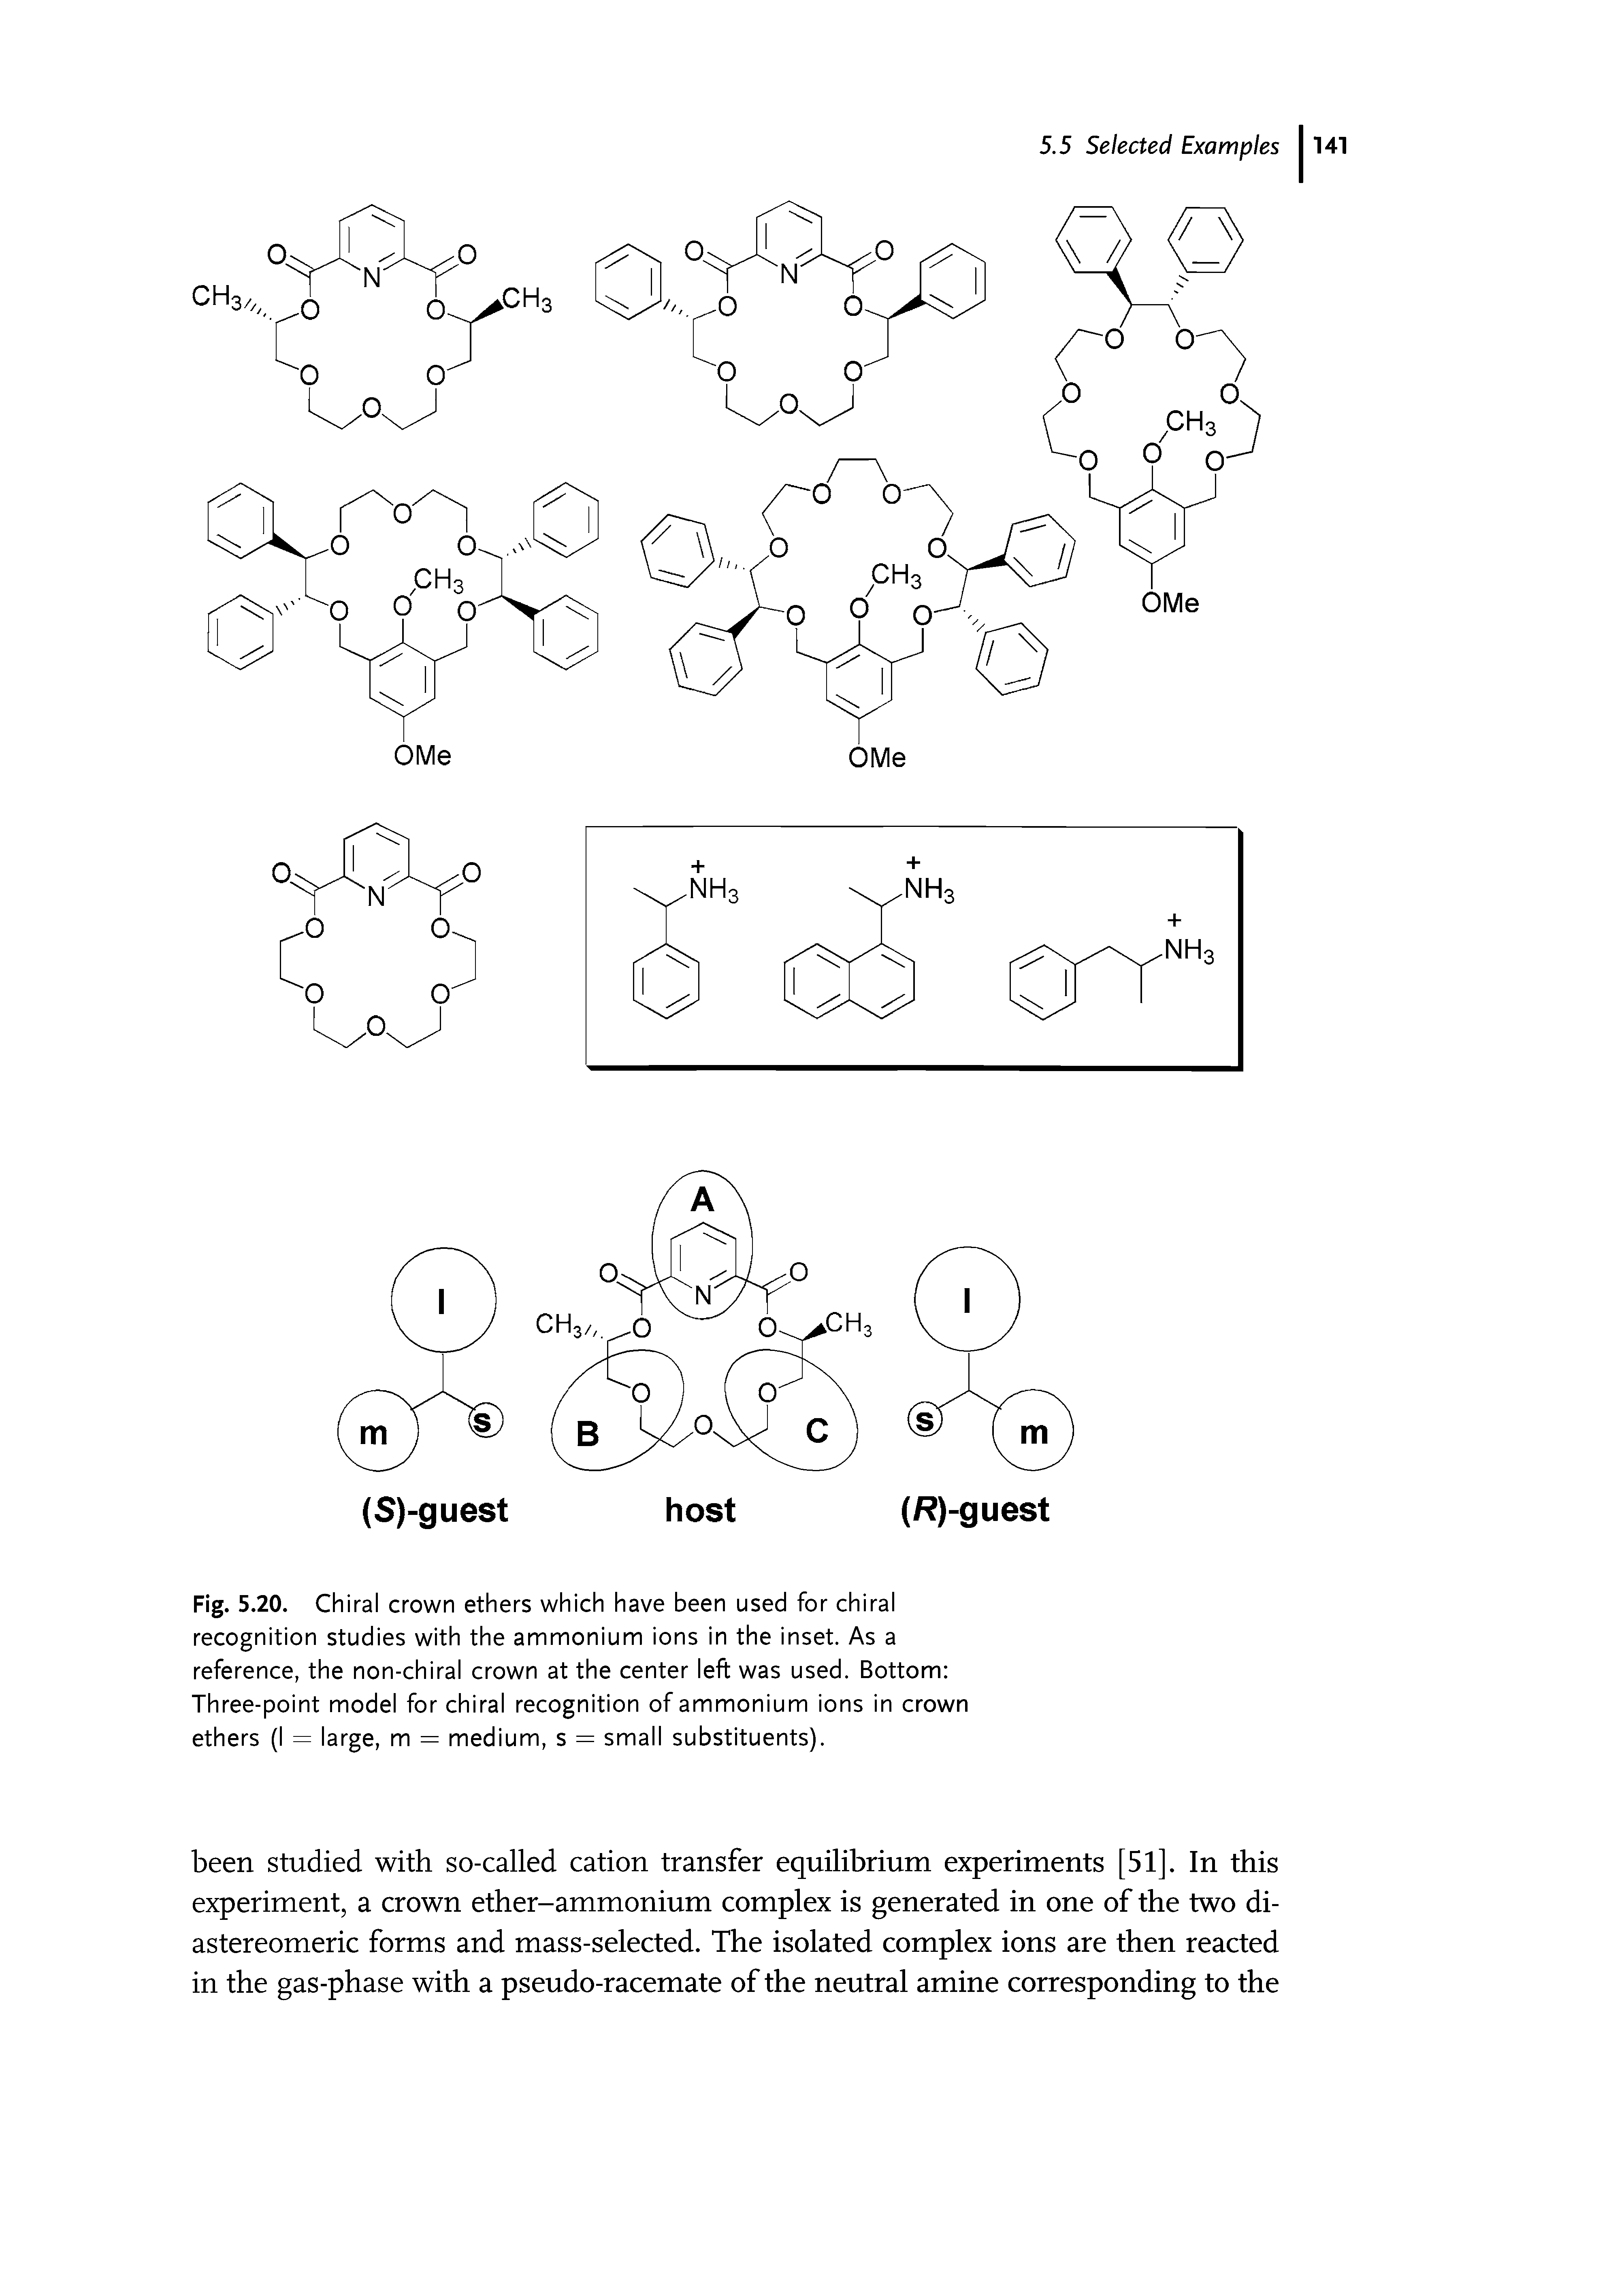 Fig. 5.20. Chiral crown ethers which have been used for chiral recognition studies with the ammonium ions in the inset. As a reference, the non-chiral crown at the center left was used. Bottom Three-point model for chiral recognition of ammonium ions in crown ethers (I = large, m = medium, s = small substituents).